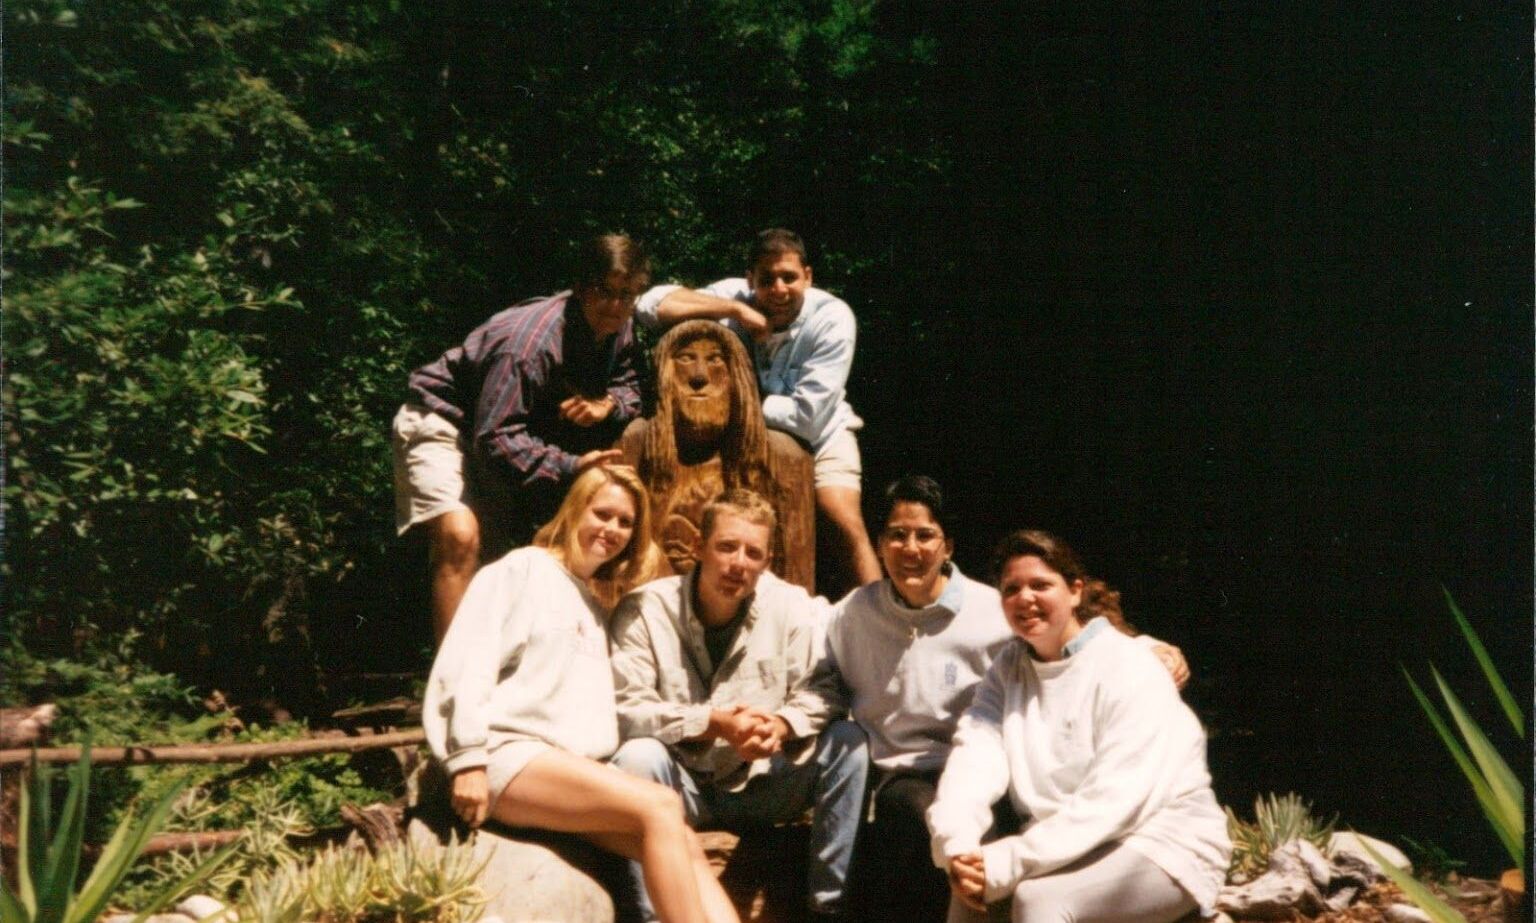 Submitted by JVC Visalia ‘93-’94: John Callahan, Liz Hanifin, Maria Laberteaux, Chris Petrone, Kristi Richter, and Harry Rissetto